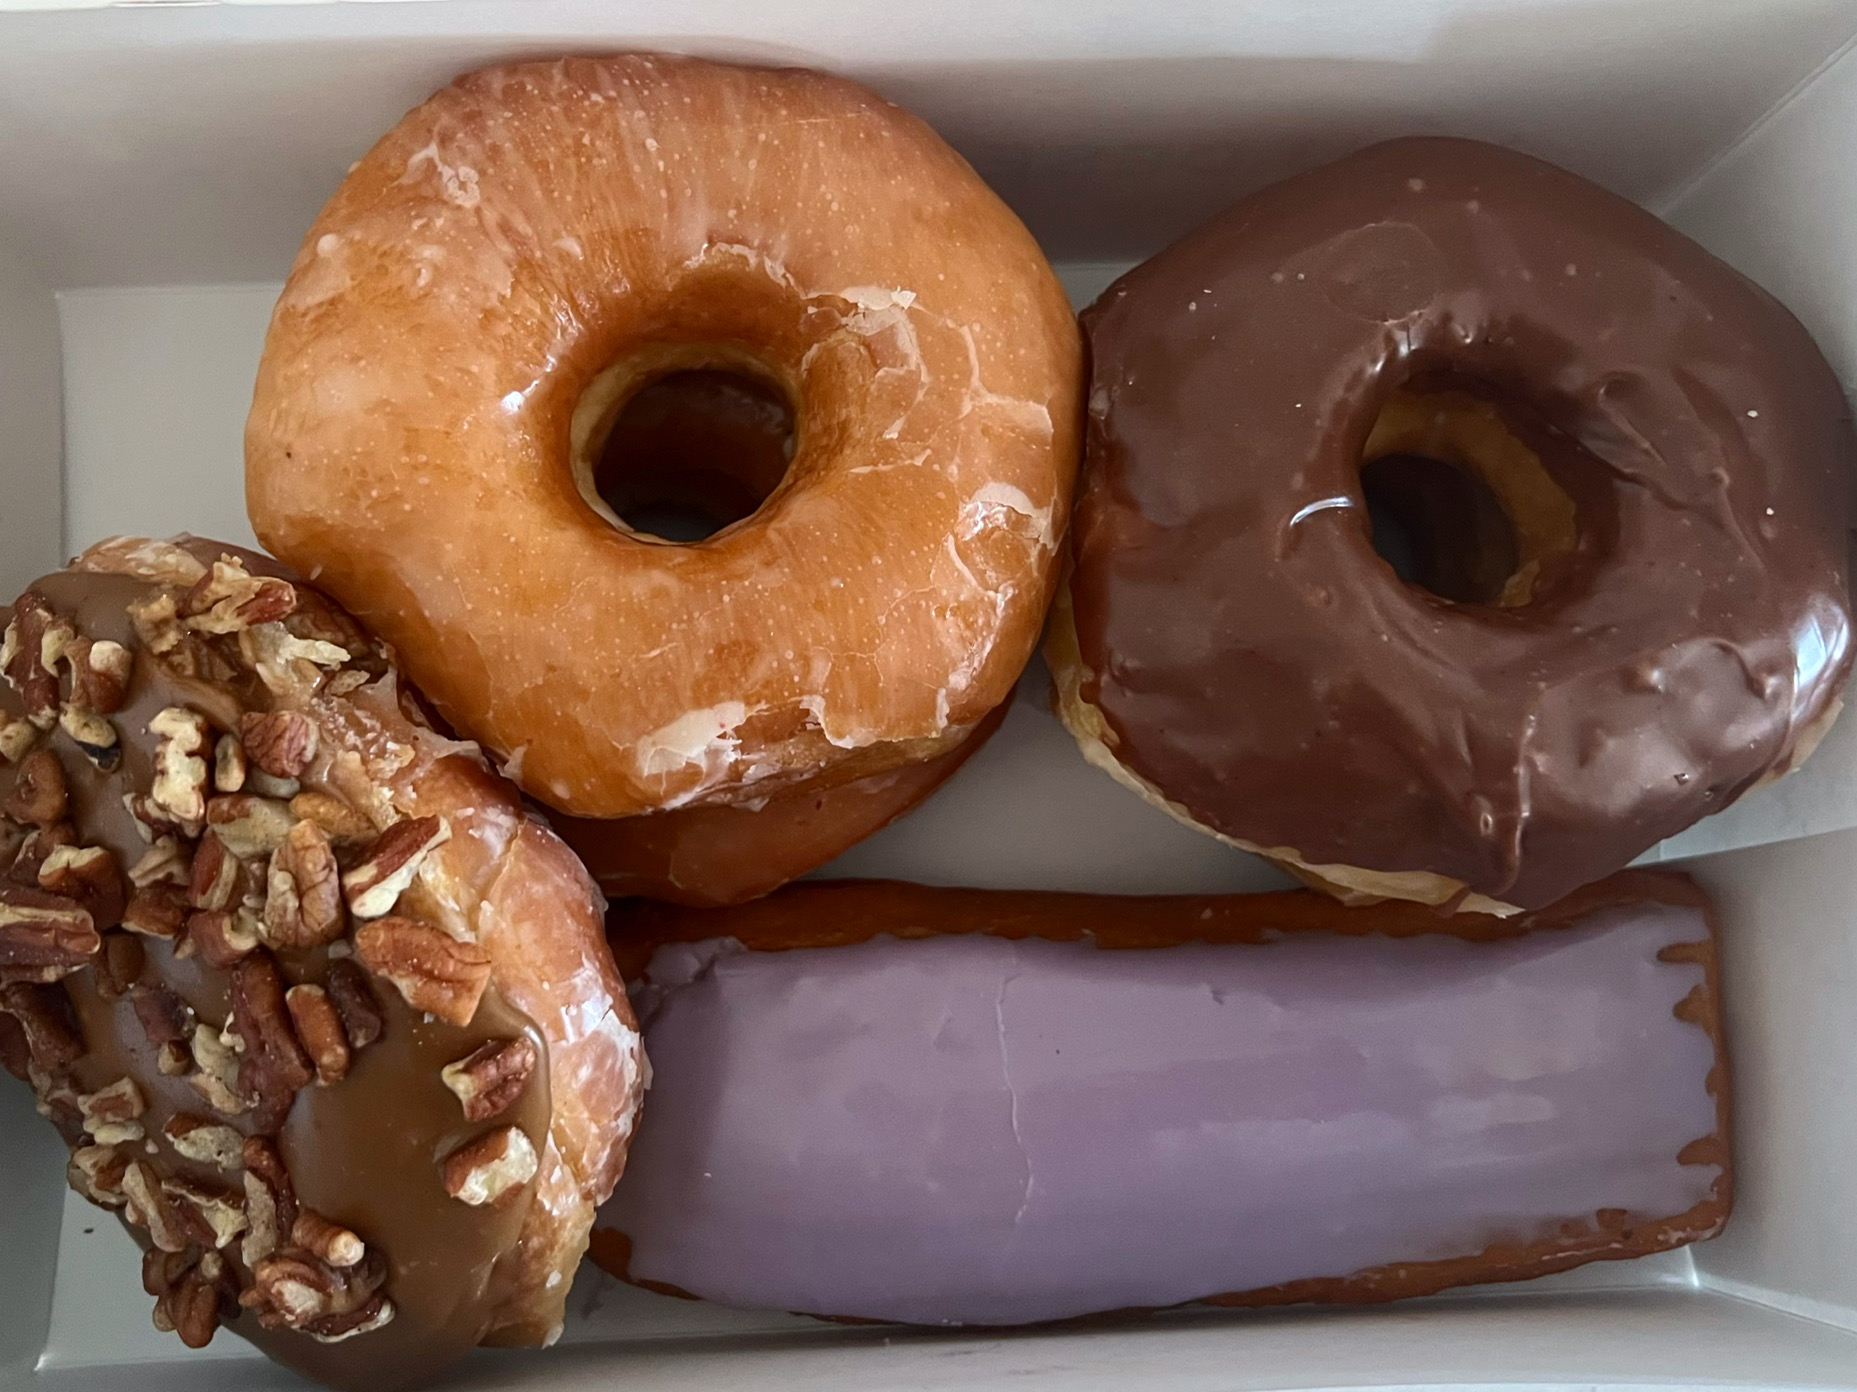 In a white box, there are assorted donuts of glazed, chocolate frosted, and a donut with chopped walnuts. Photo by Alyssa Buckley.